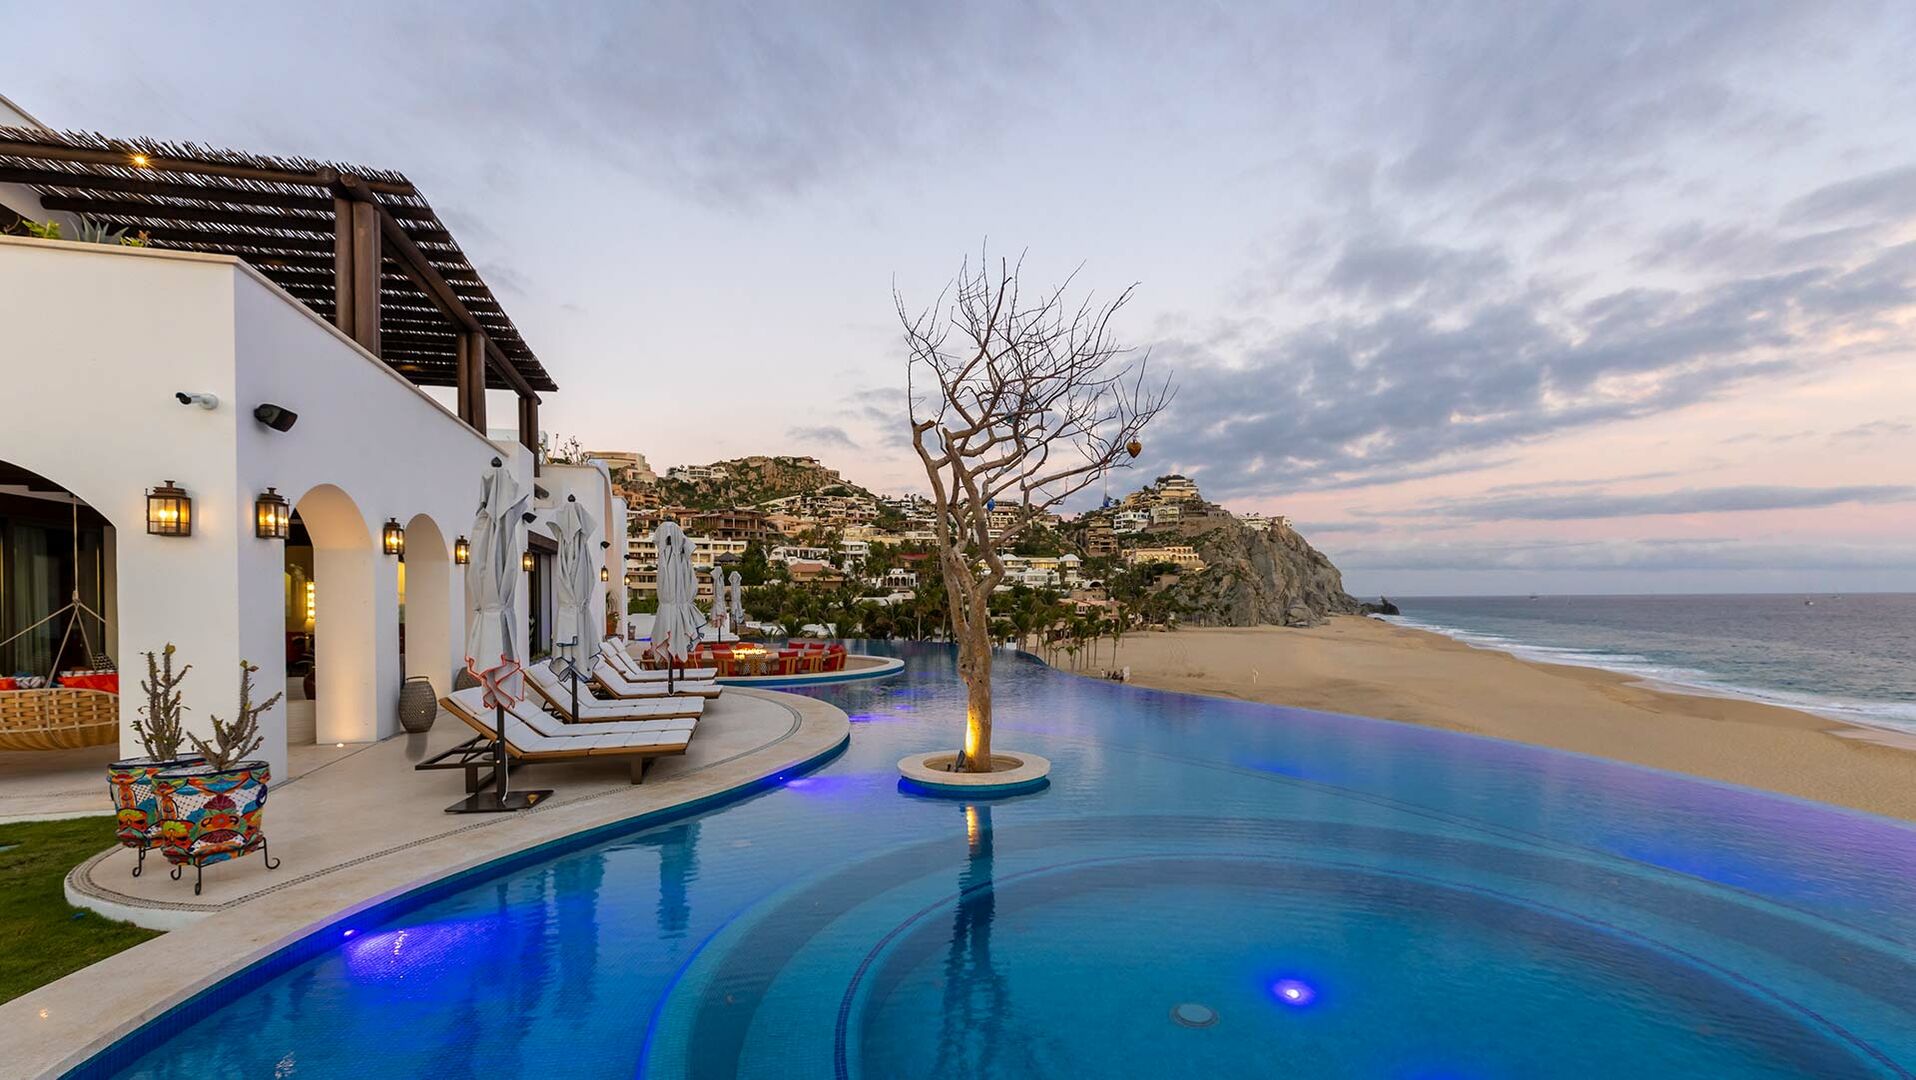 A tree sits in the middle of the pool of this Los Cabos beachfront villa.